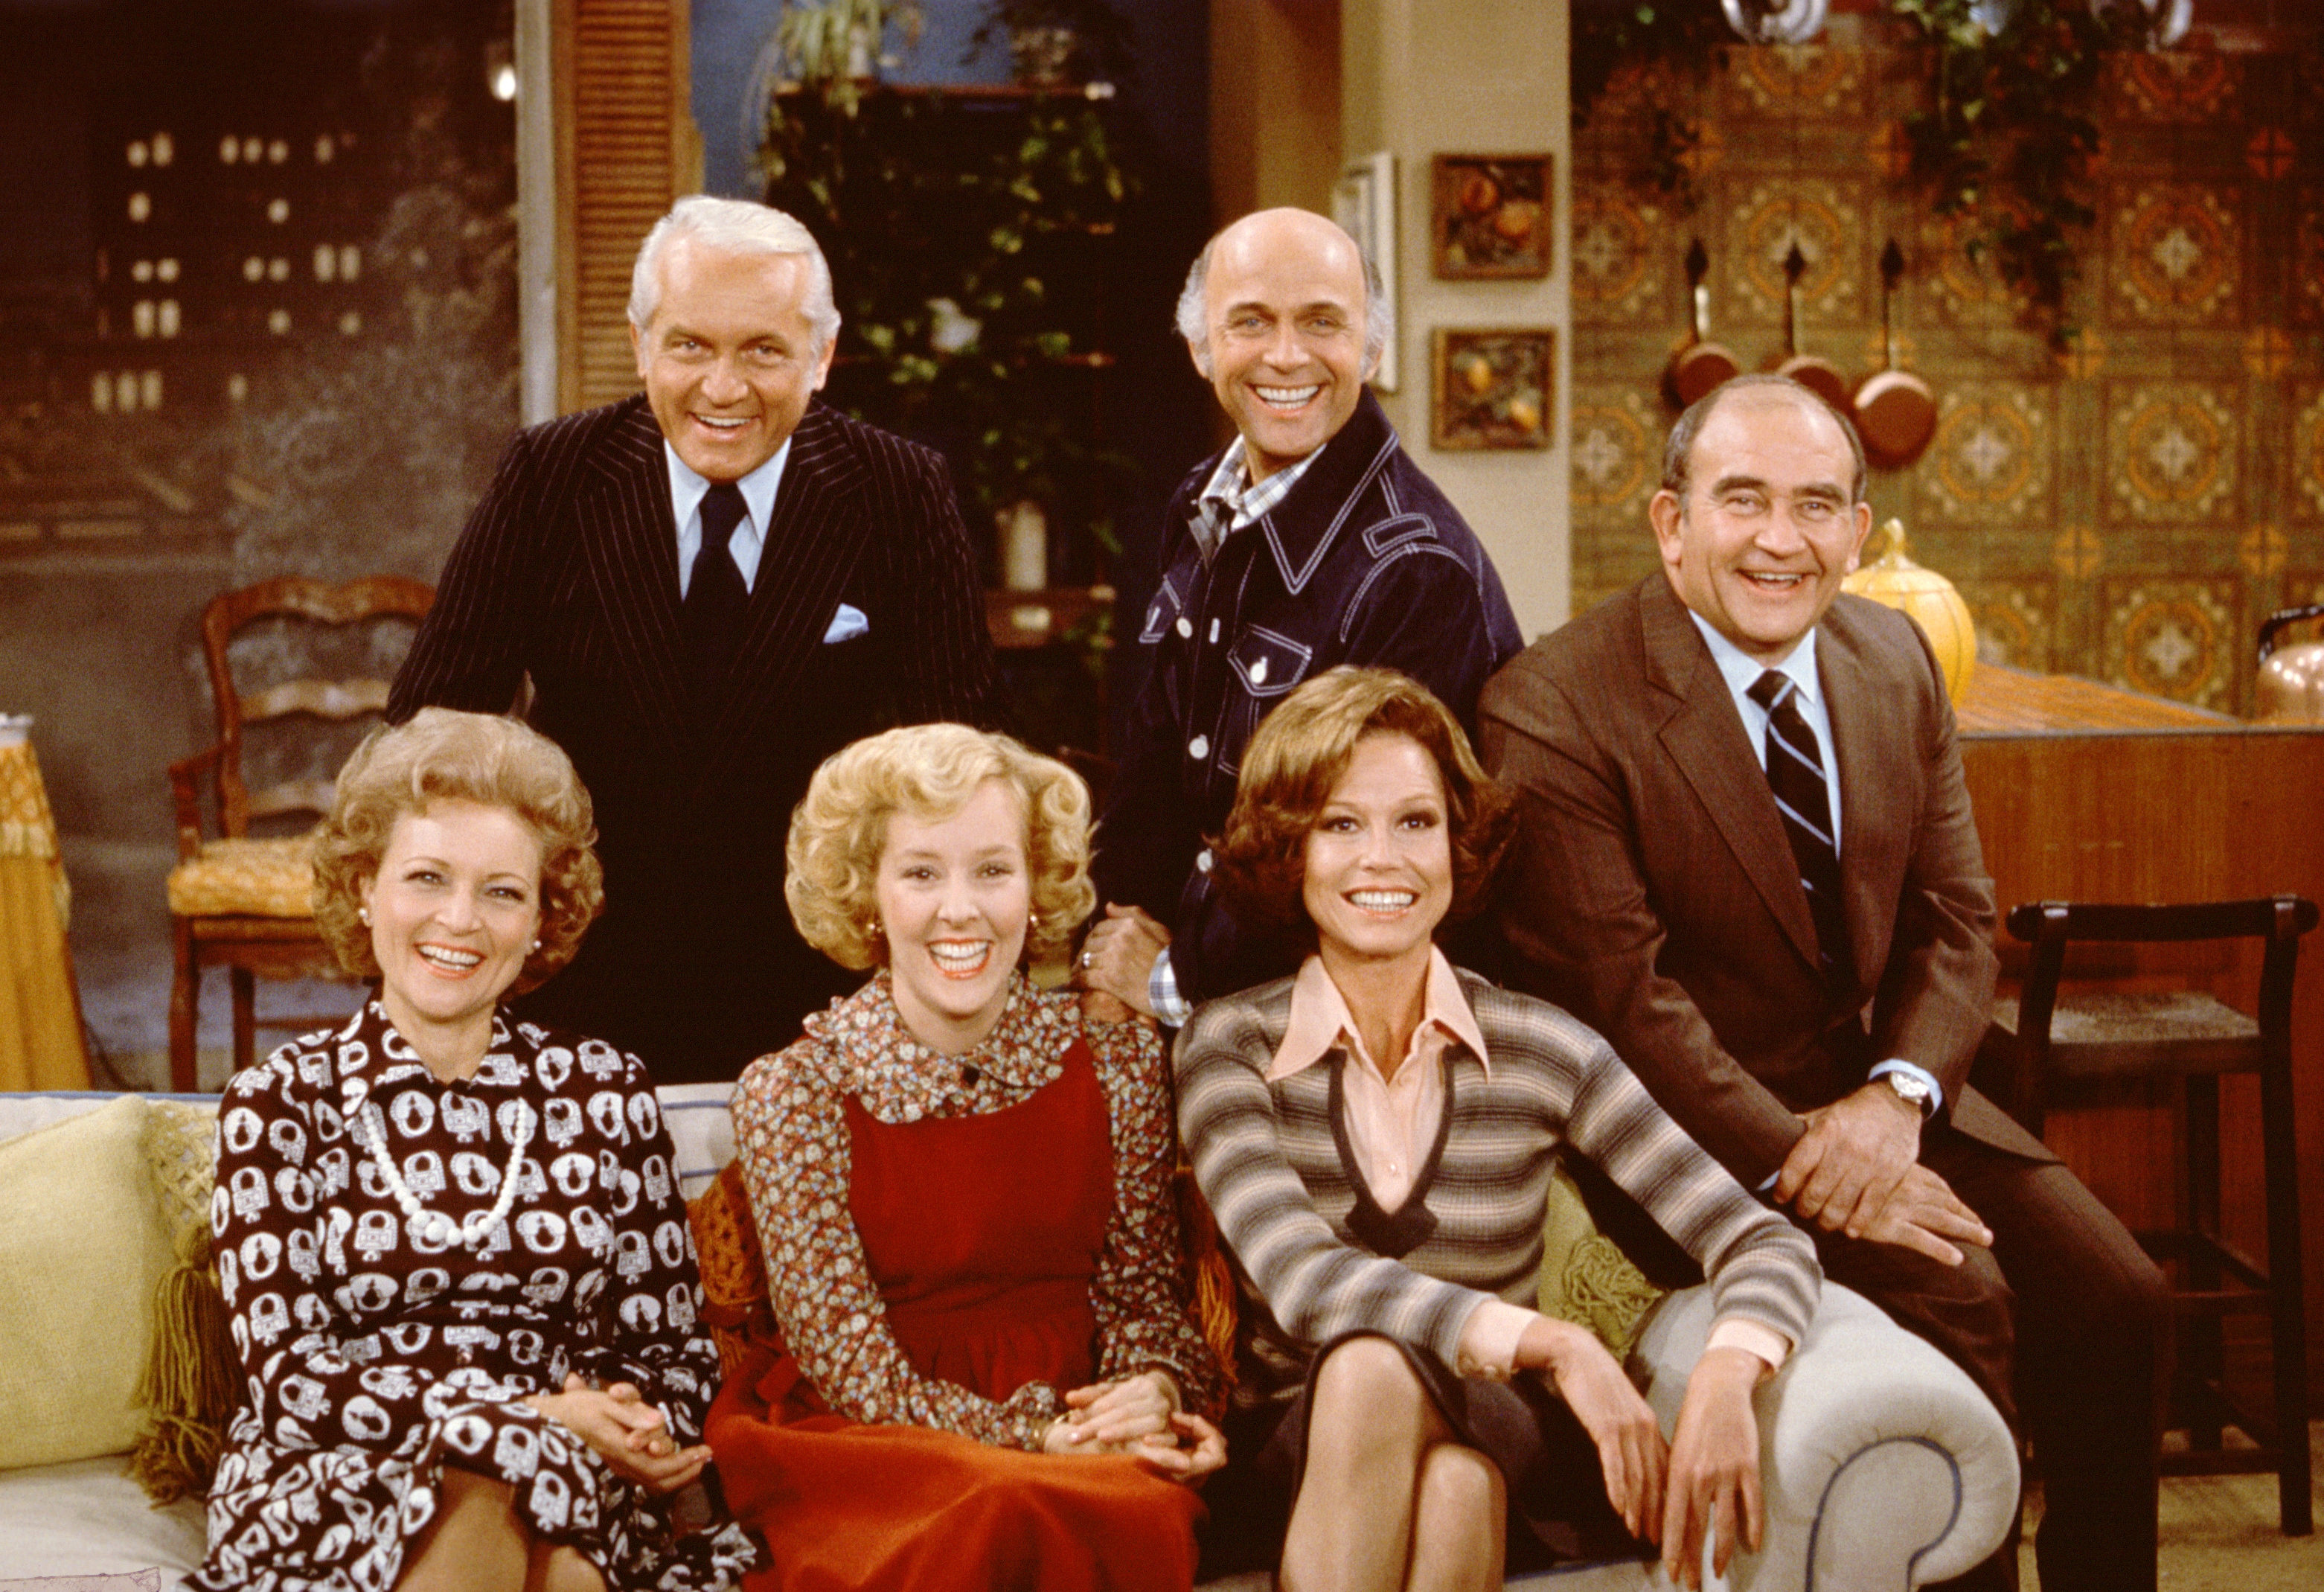 Betty White, as Sue Ann Nivens, Ted Knight as Ted Baxter, Georgia Engel as Georgette Franklin Baxter, Gavin McLeod as Murray Slaughter, Mary Tyler Moore as Mary Richards, and Ed Asner as Lou Grant pictured on the set of "The Mary Tyler Moore Show." | Source: Getty Images